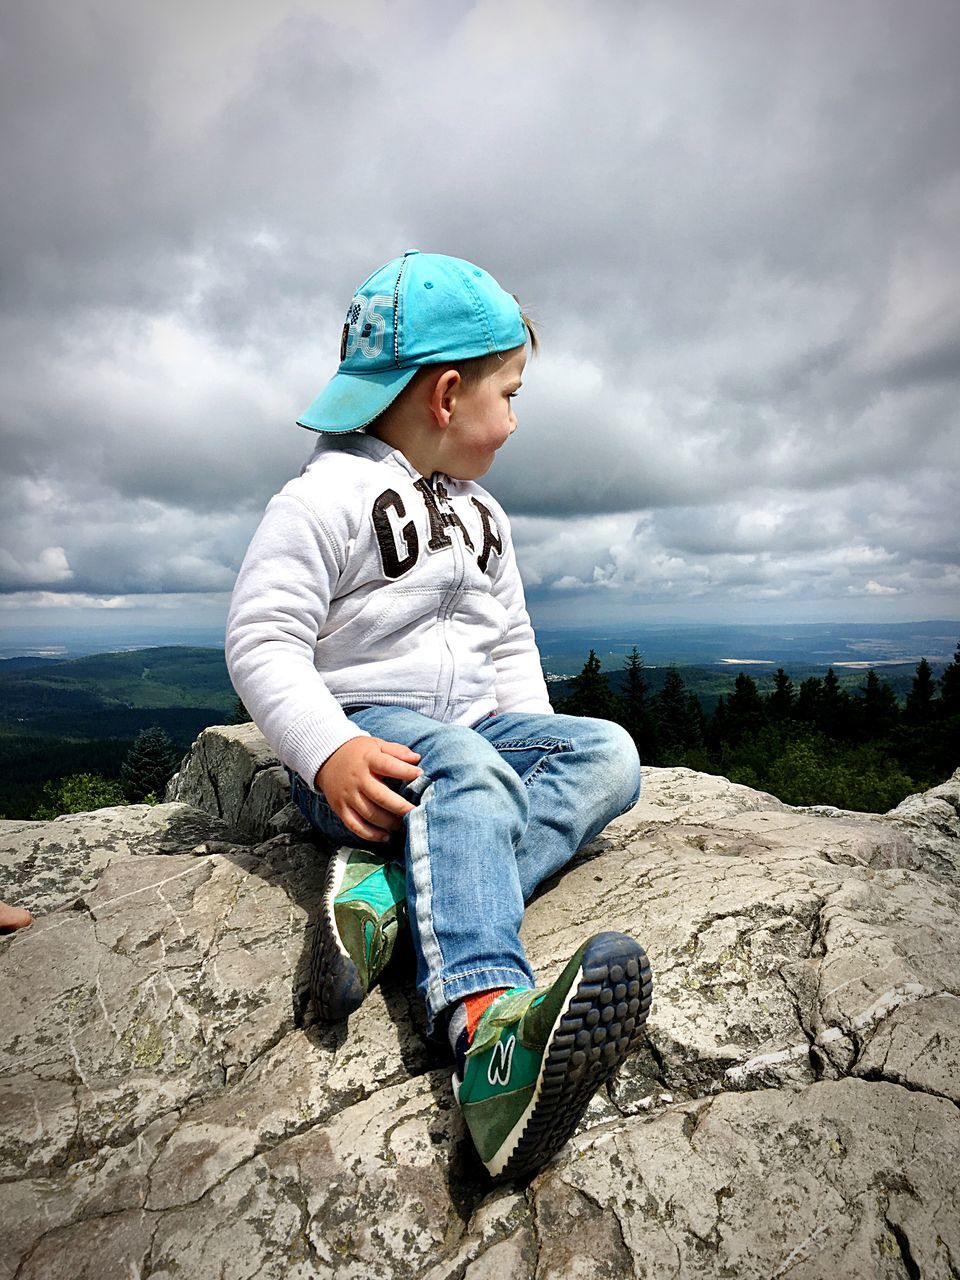 childhood, boys, cloud - sky, real people, one person, casual clothing, full length, sky, rock - object, leisure activity, elementary age, sitting, day, outdoors, lifestyles, shoe, adventure, one boy only, nature, beauty in nature, water, people